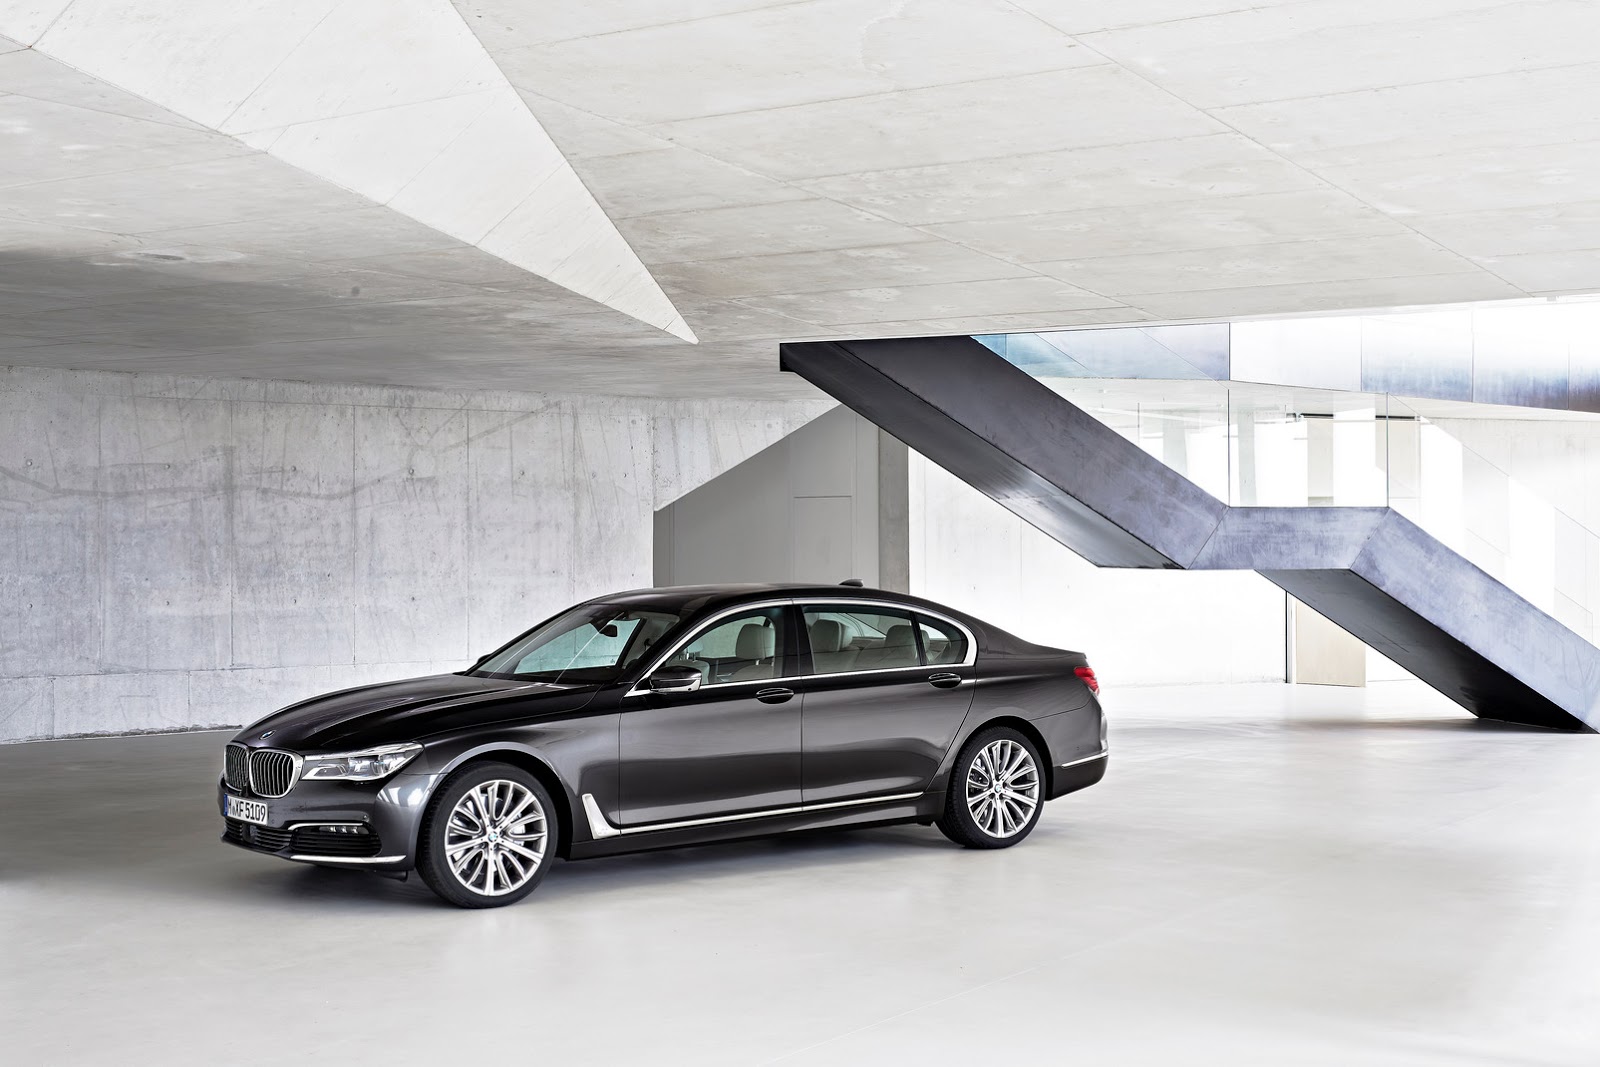 All-New BMW 7-Series Makes It into the Final of 2016 ”Car of the Year”